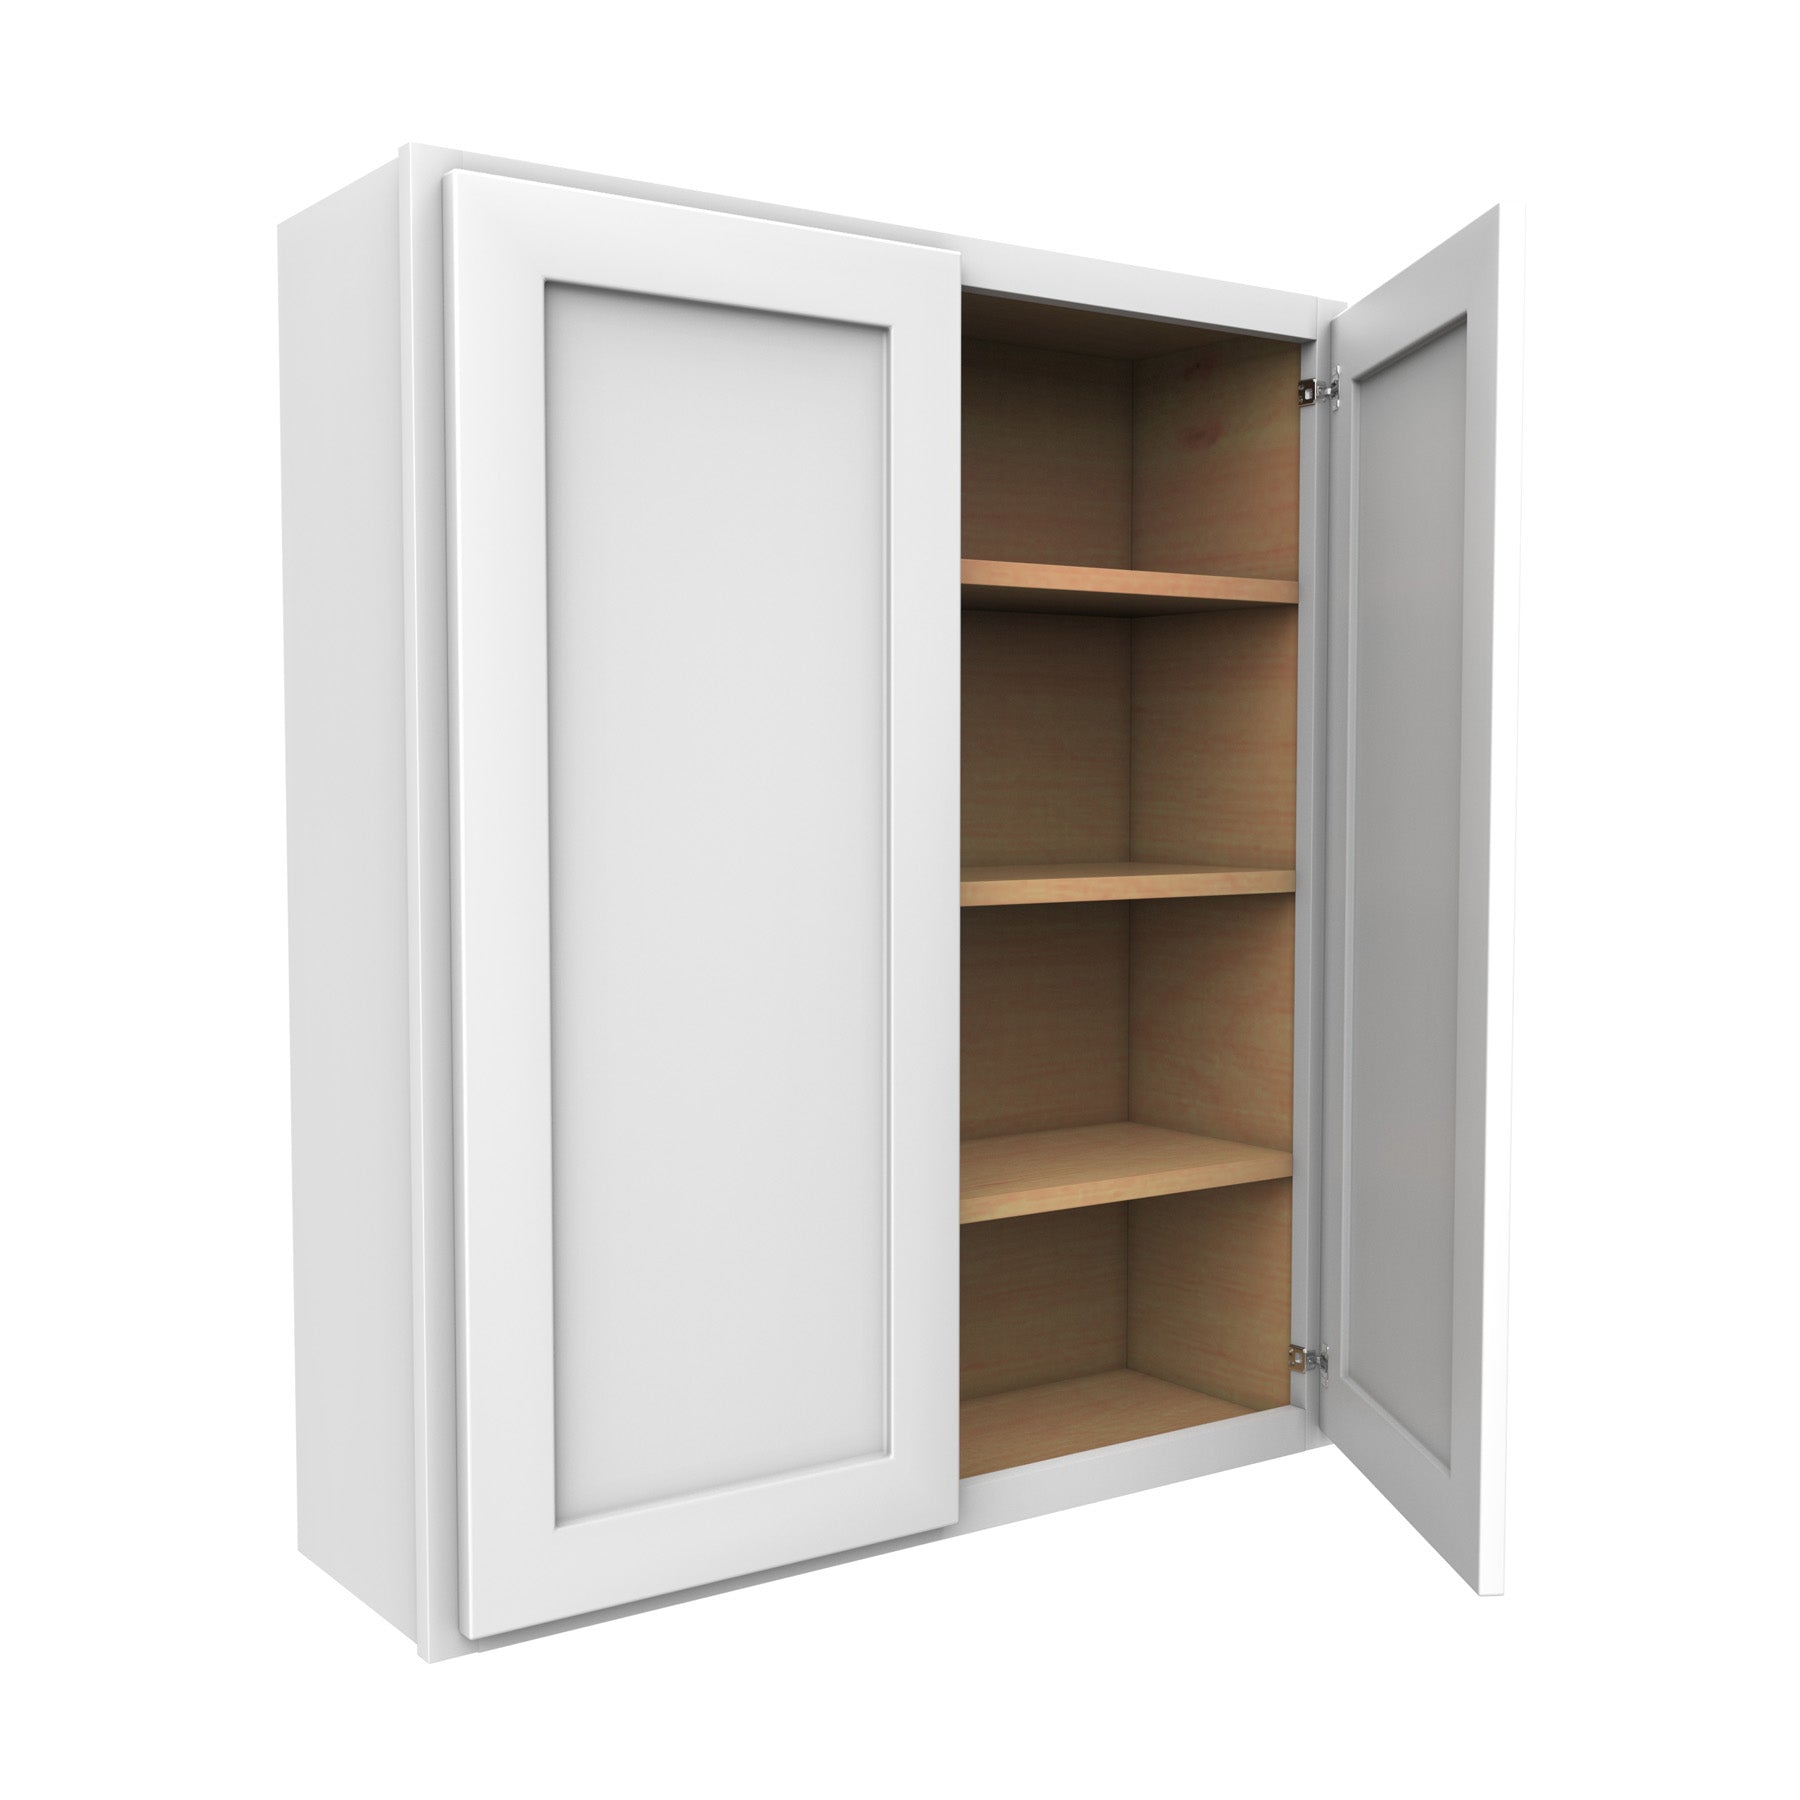 42 Inch High Double Door Wall Cabinet - Luxor White Shaker - Ready To Assemble, 36"W x 42"H x 12"D